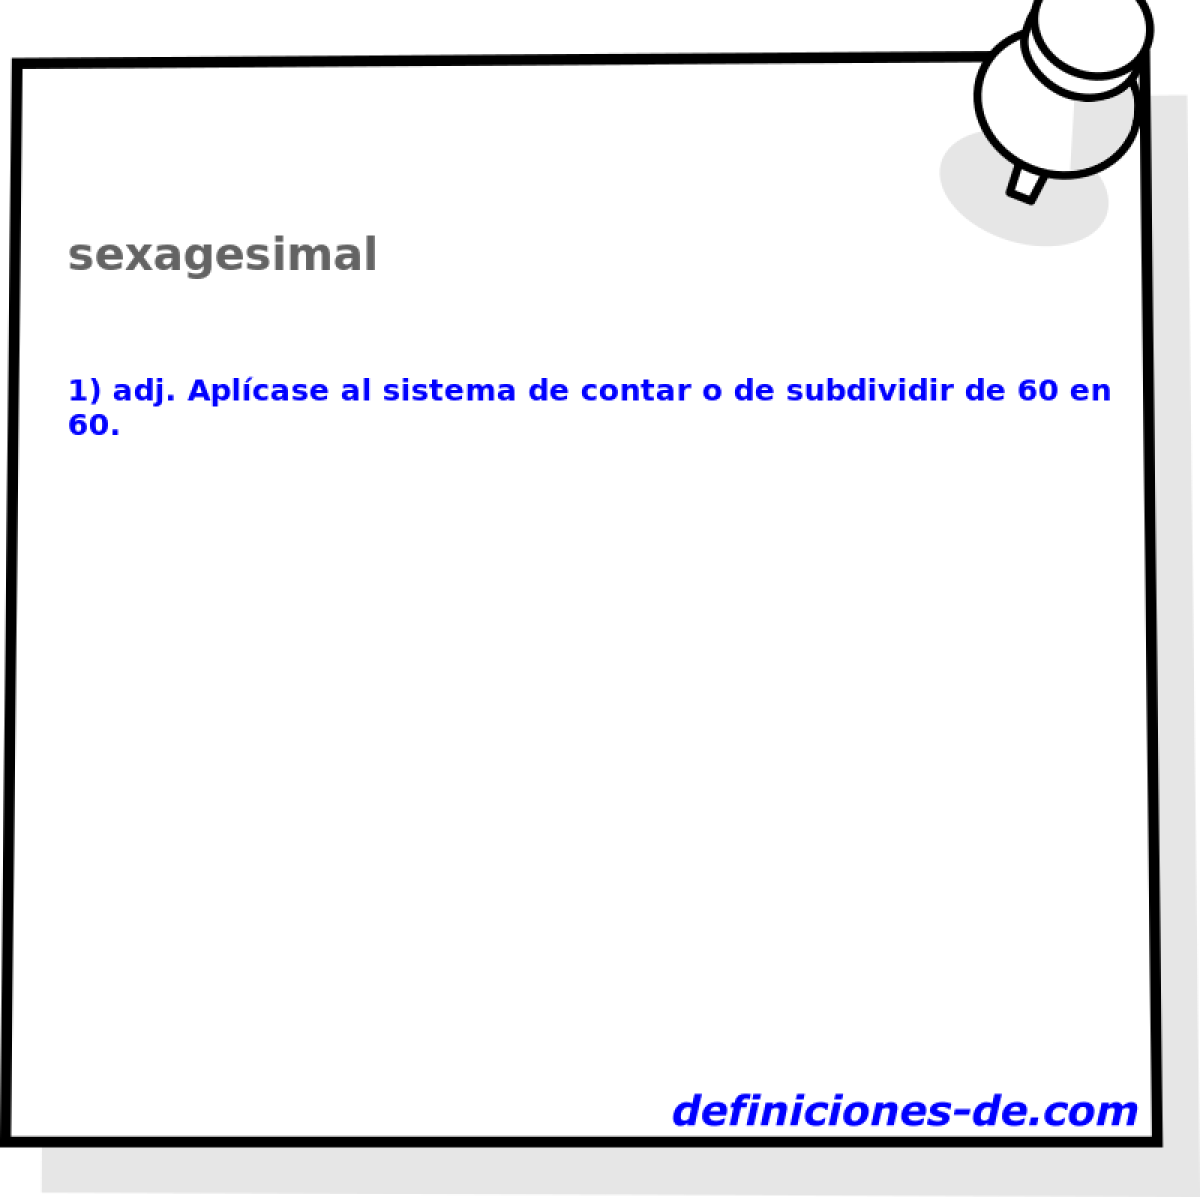 sexagesimal 